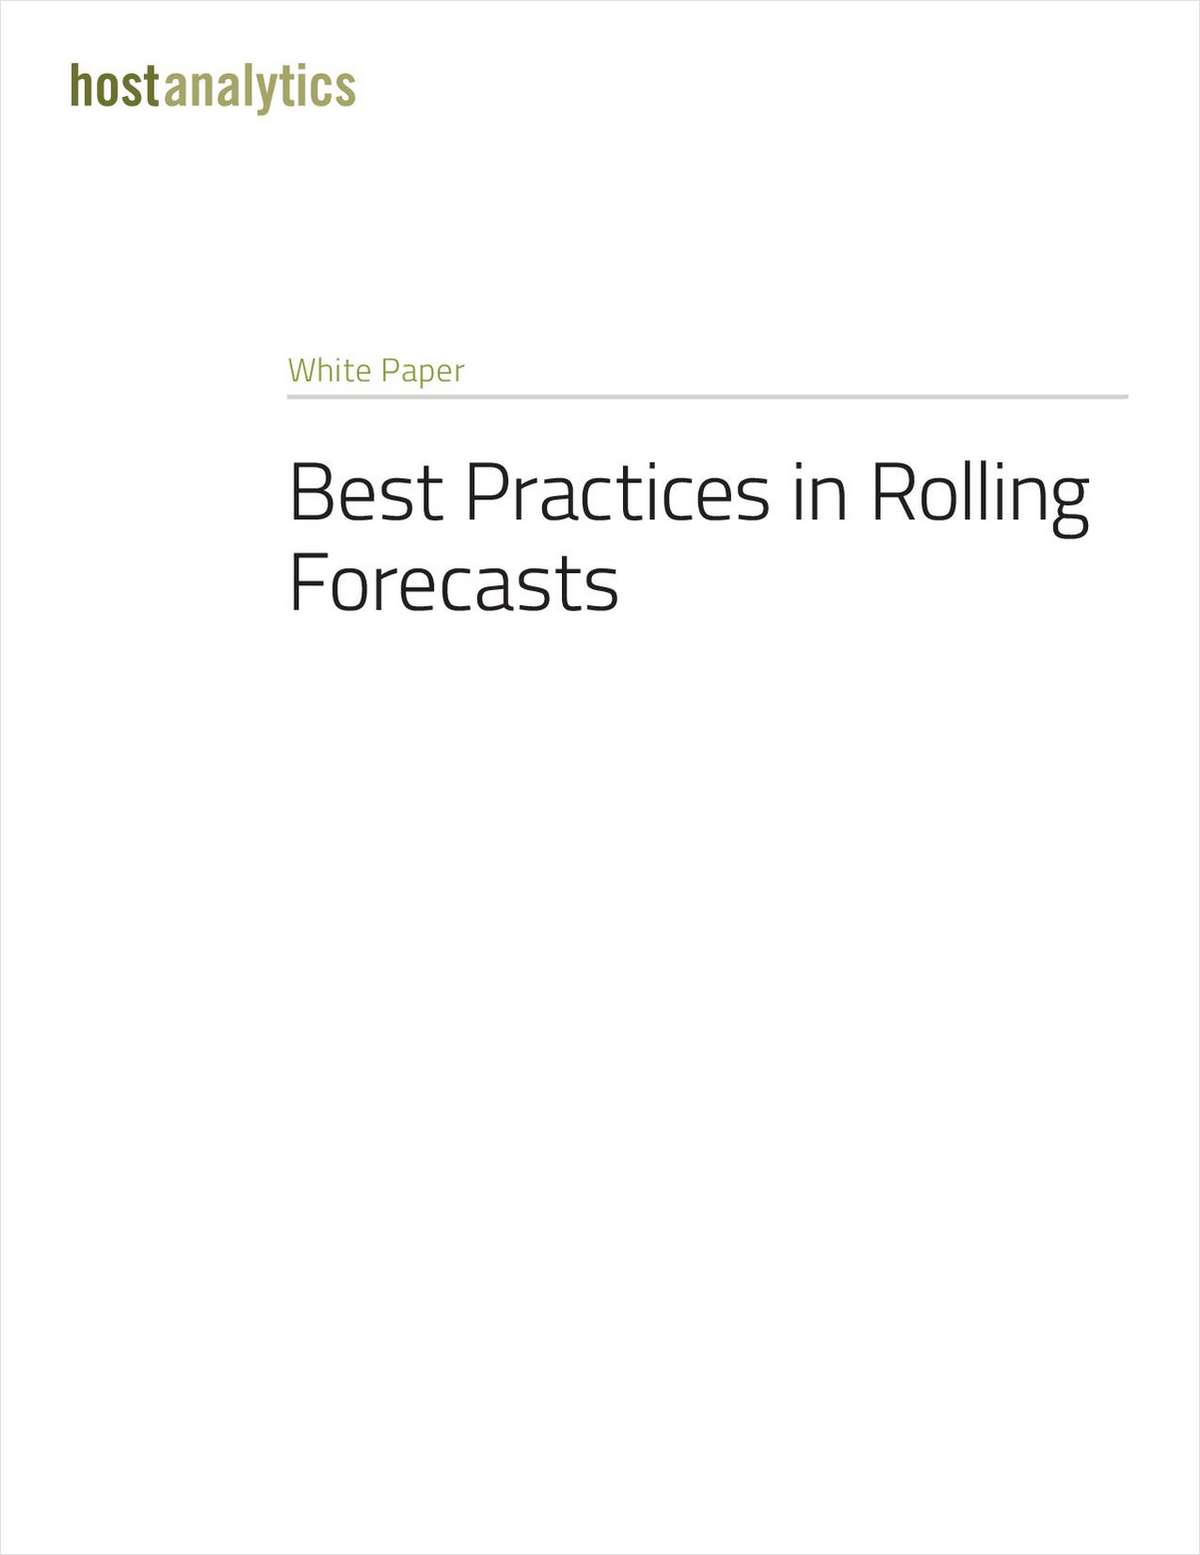 Best Practices in Rolling Forecasts